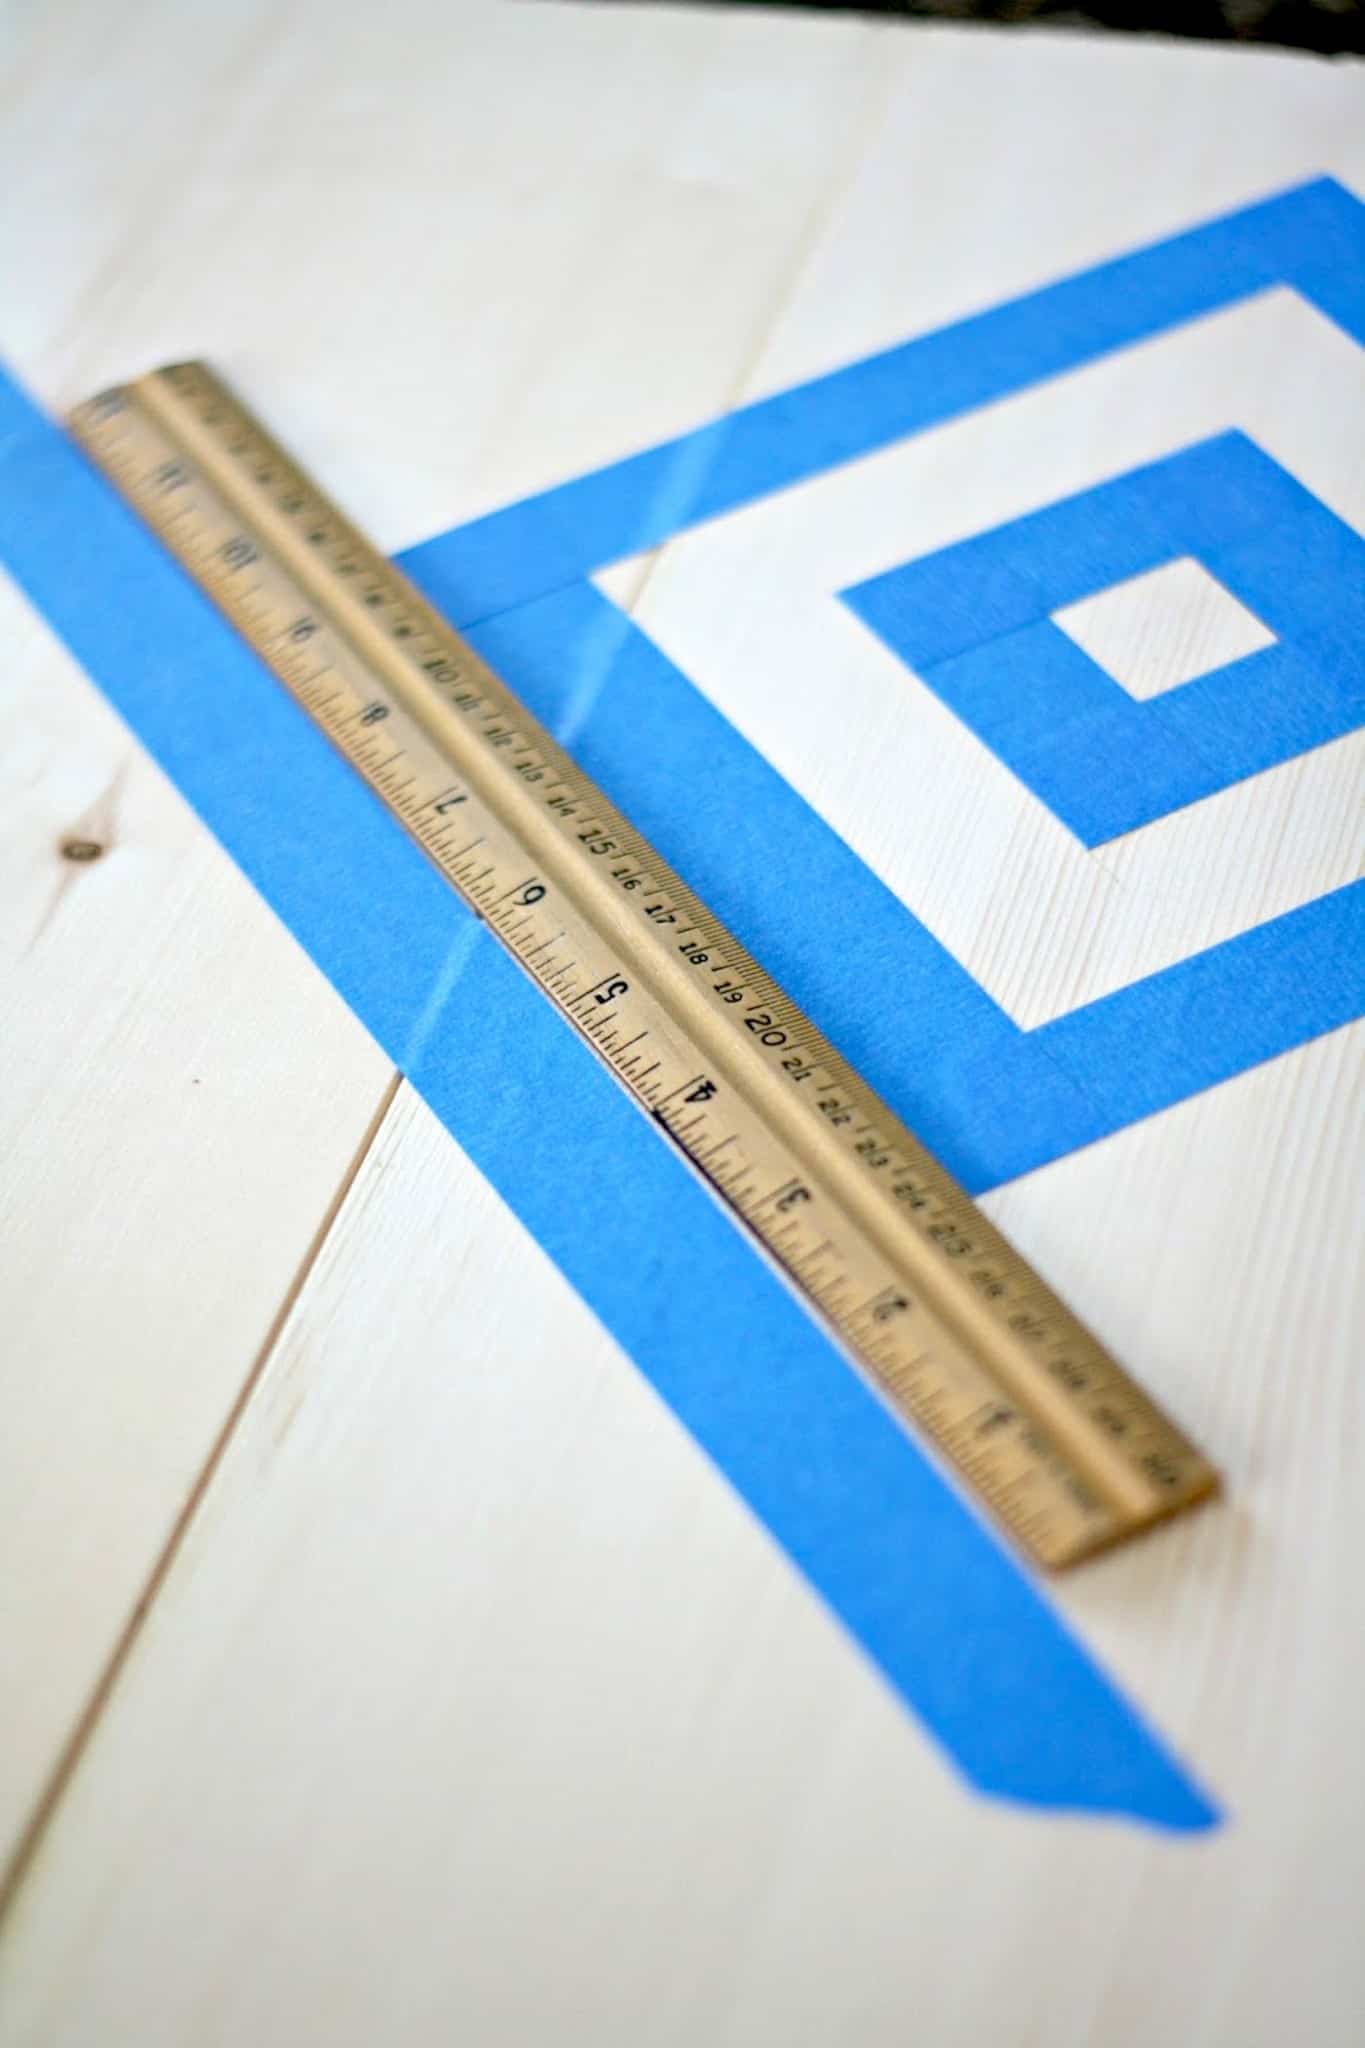 Making squares on a wood panel using painter's tape and a ruler